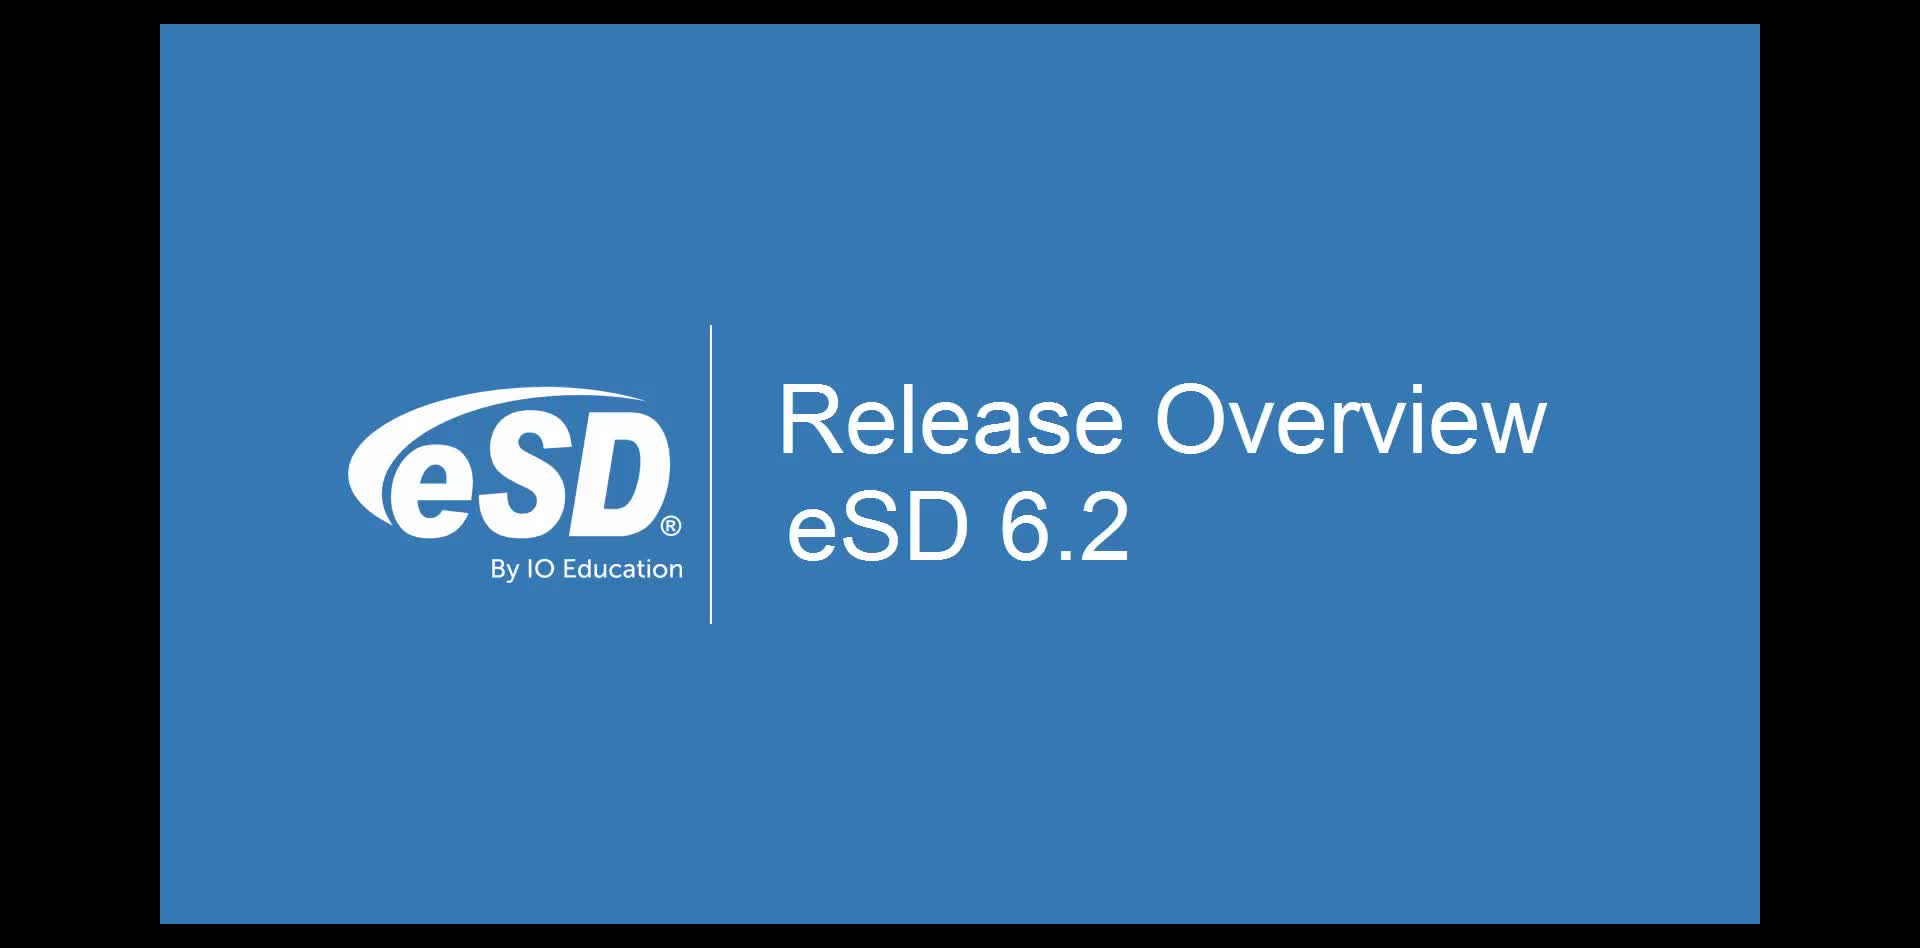 eSD 6.2 Release Overview